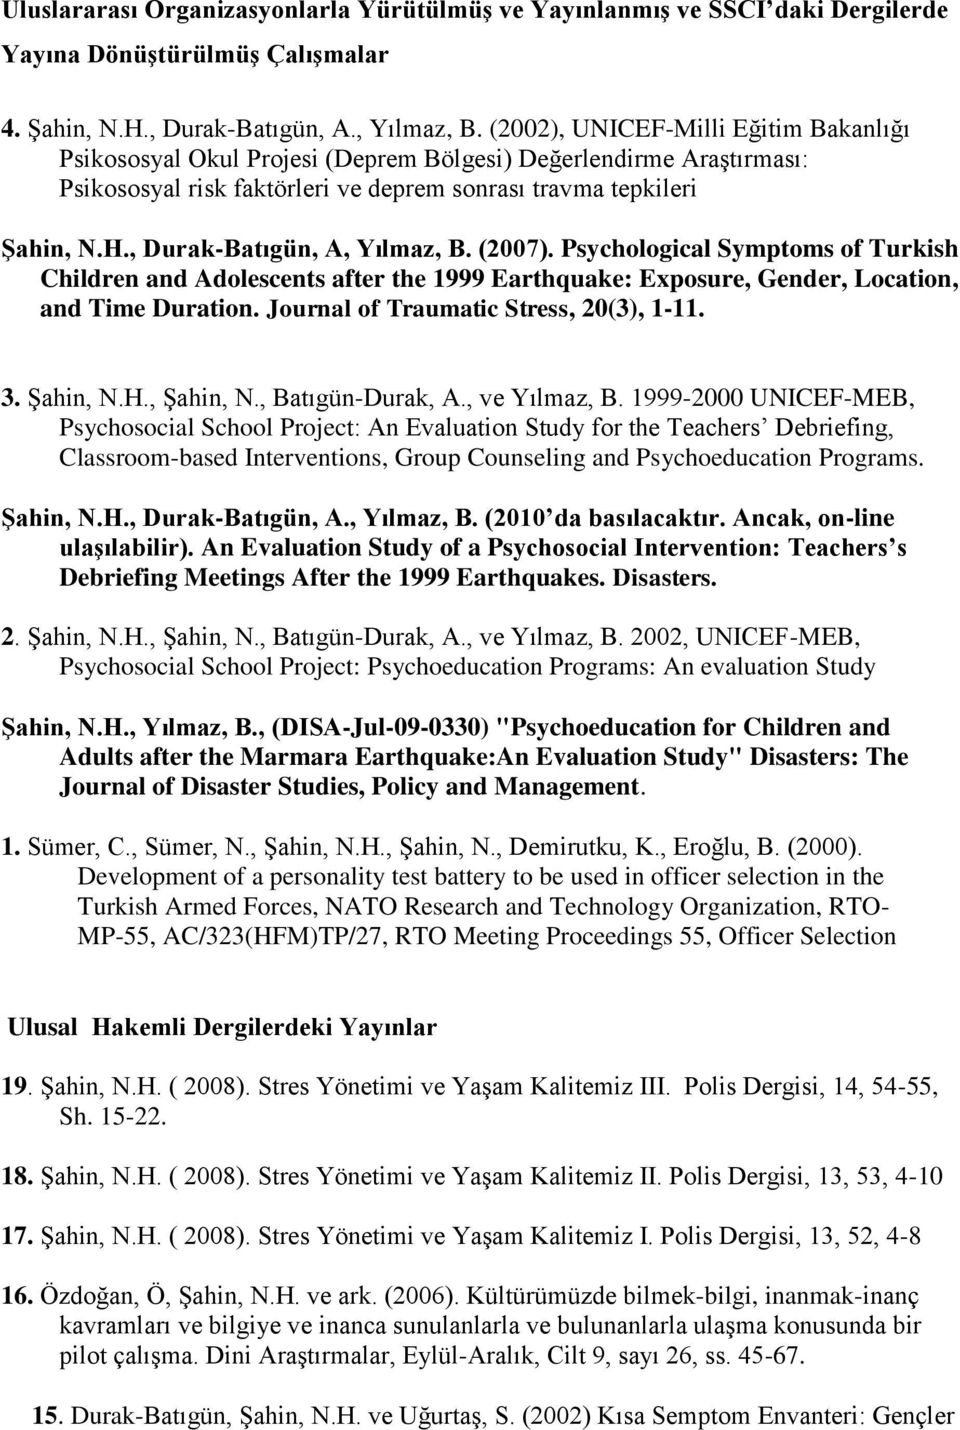 , Durak-Batıgün, A, Yılmaz, B. (2007). Psychological Symptoms of Turkish Children and Adolescents after the 1999 Earthquake: Exposure, Gender, Location, and Time Duration.